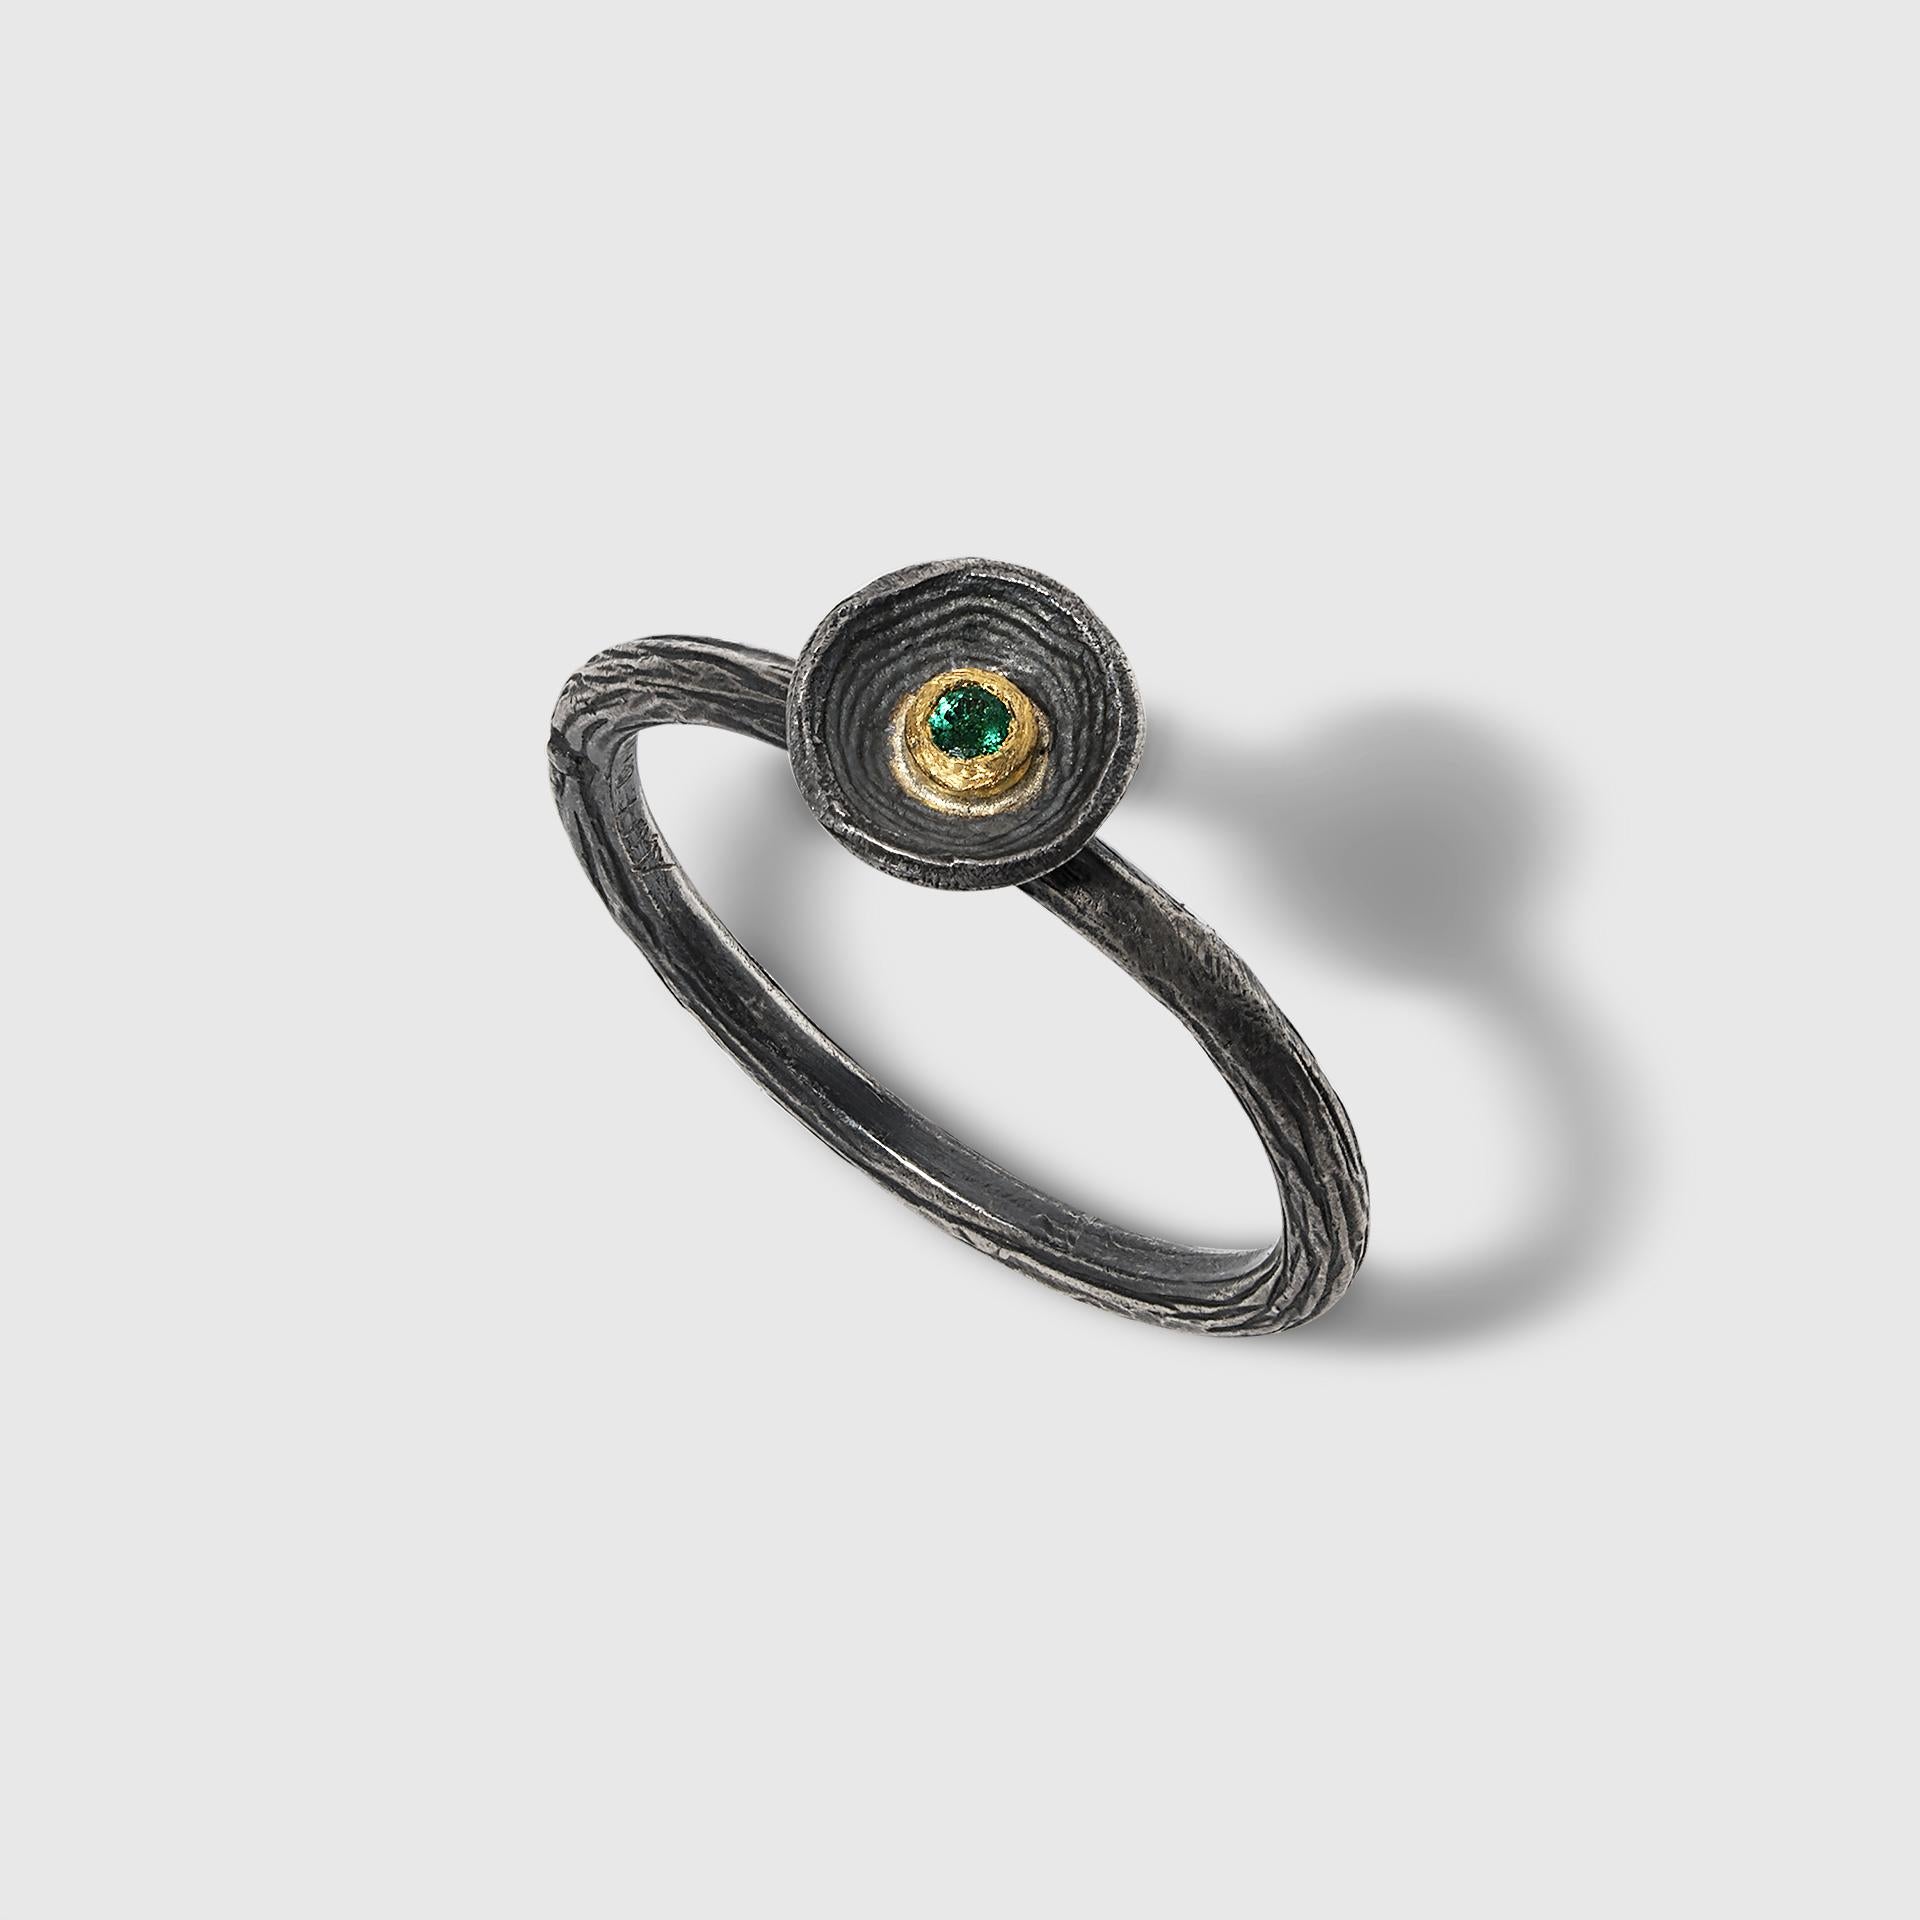 Artisan Tiny Emerald, 24K Yellow Gold and Sterling Silver Stacker Ring